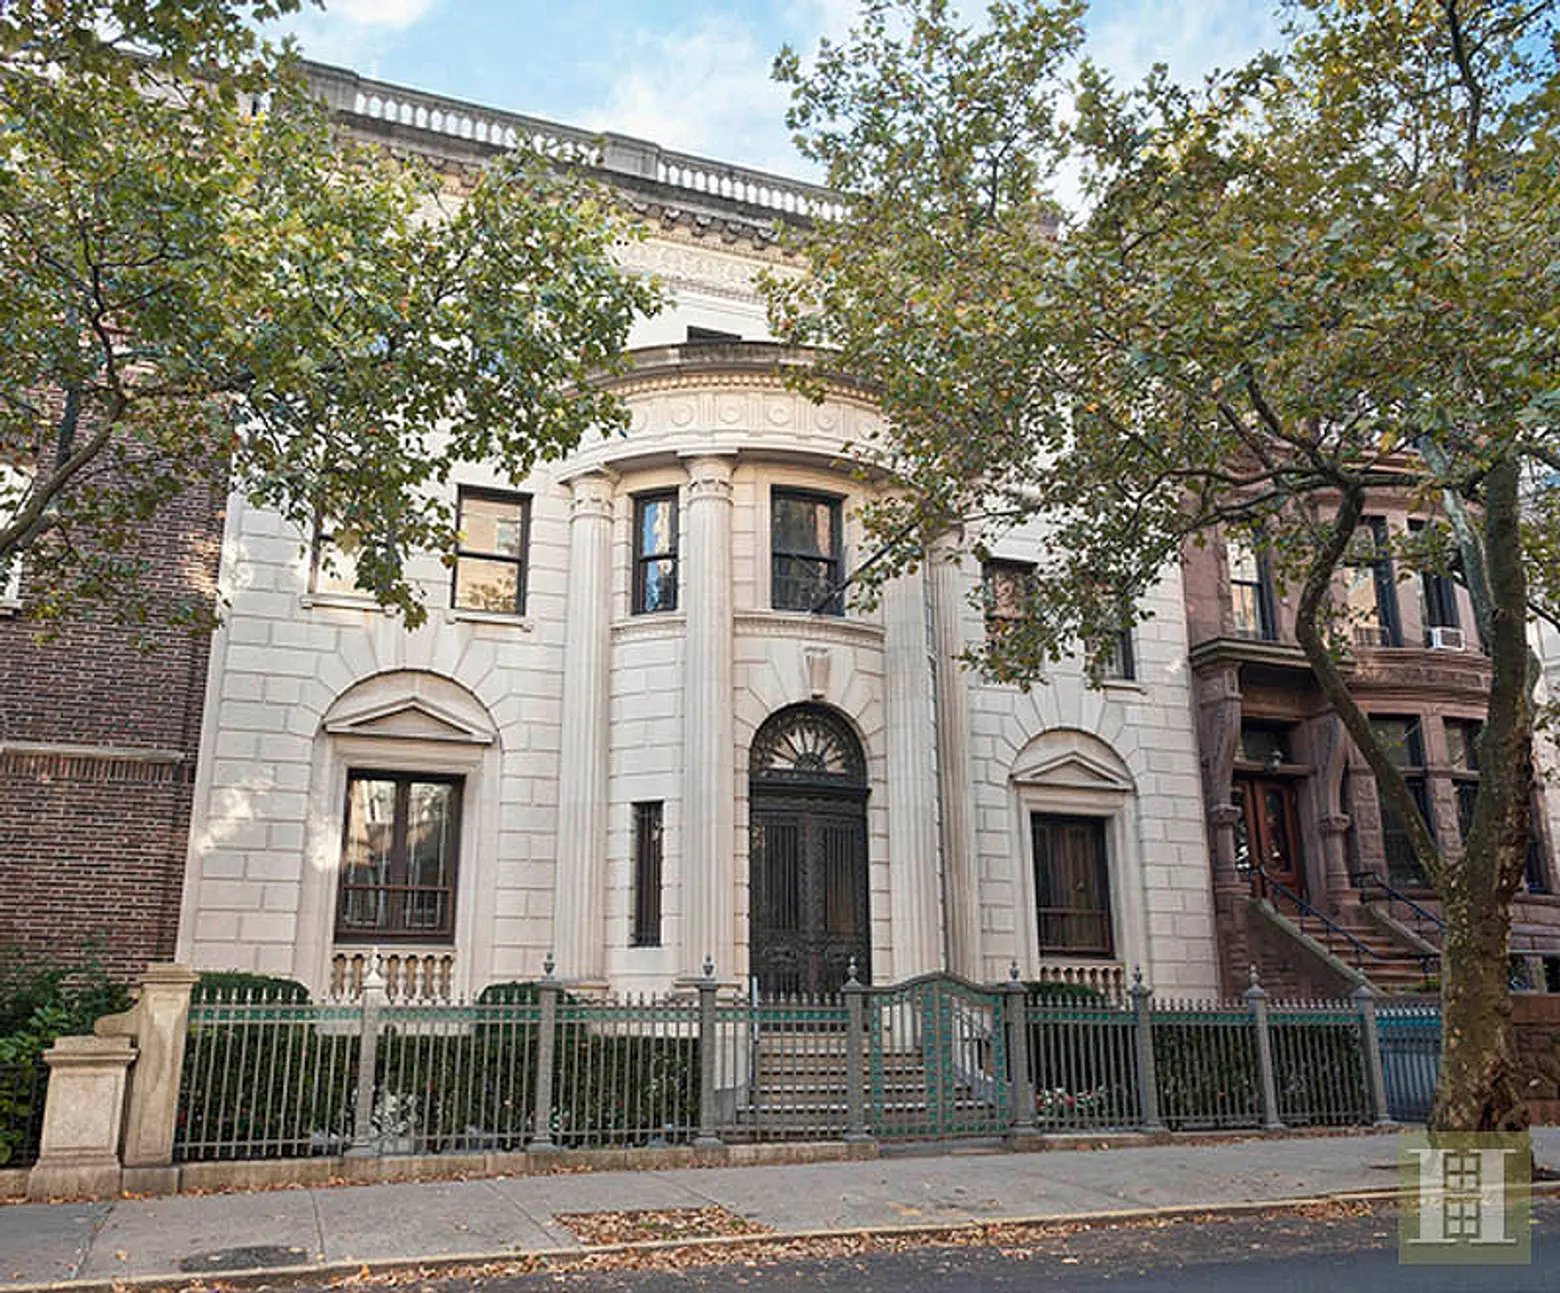 Brooklyn’s Historic Tracy Mansion to be Turned Into Condos; Sinatra’s Former Penthouse Sells for $5M